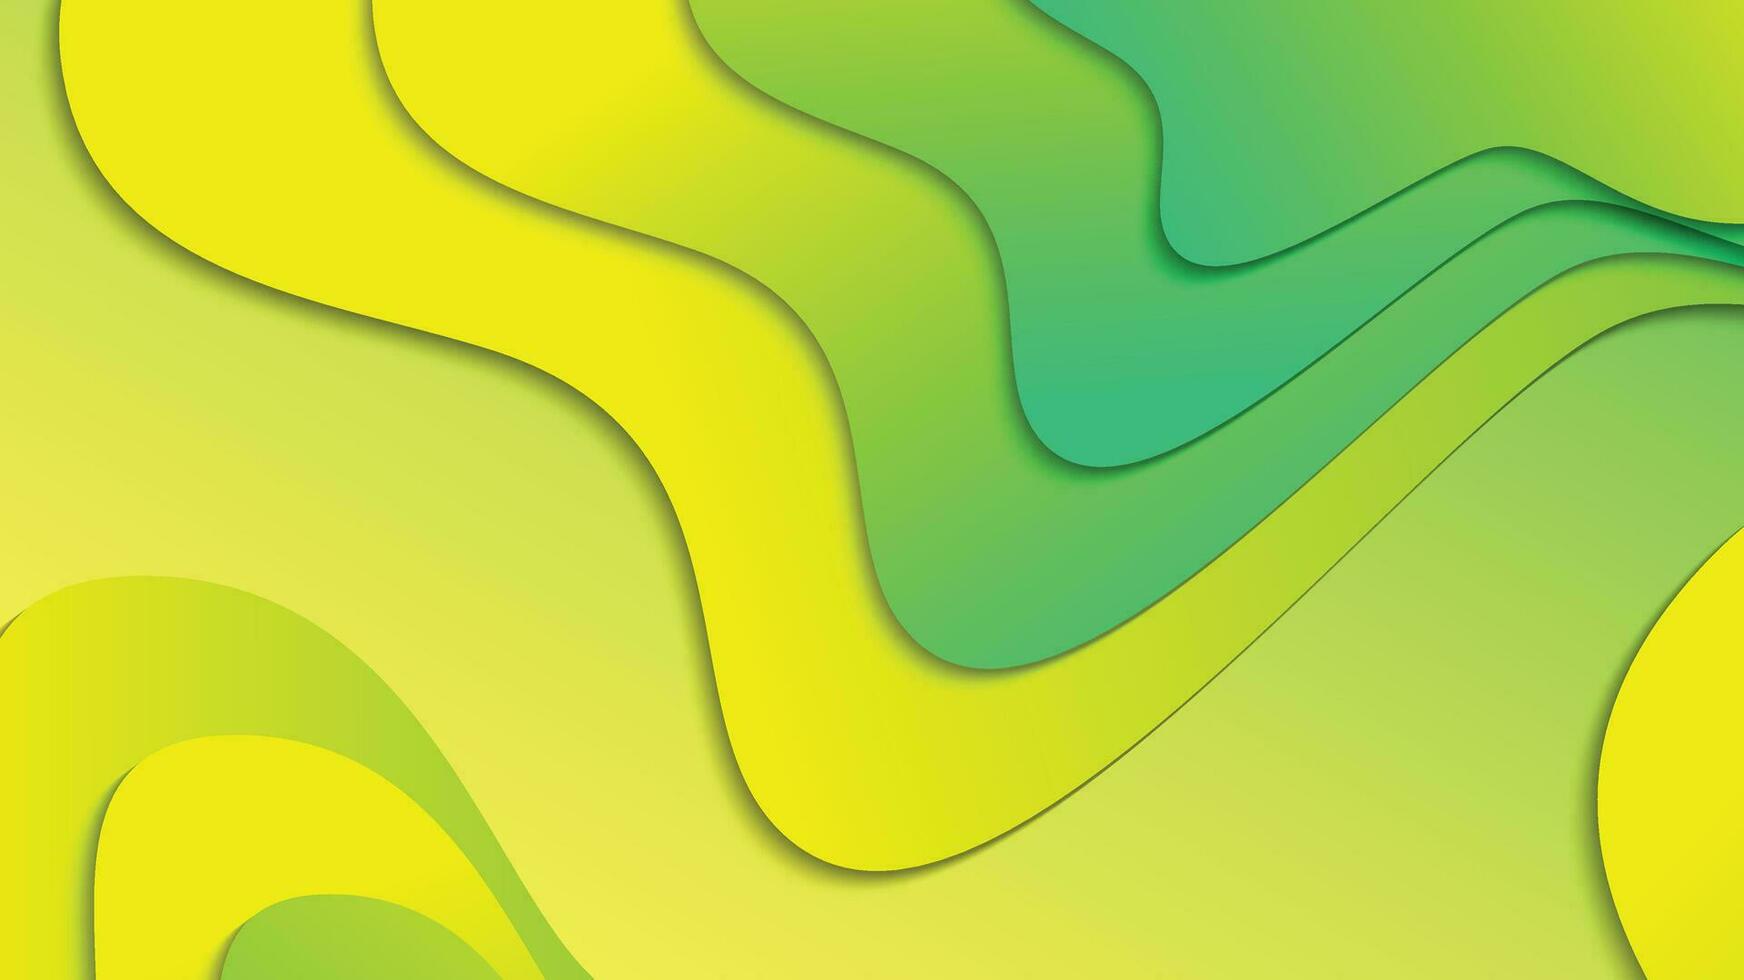 Green and yellow gradient fluid wave abstract background vector